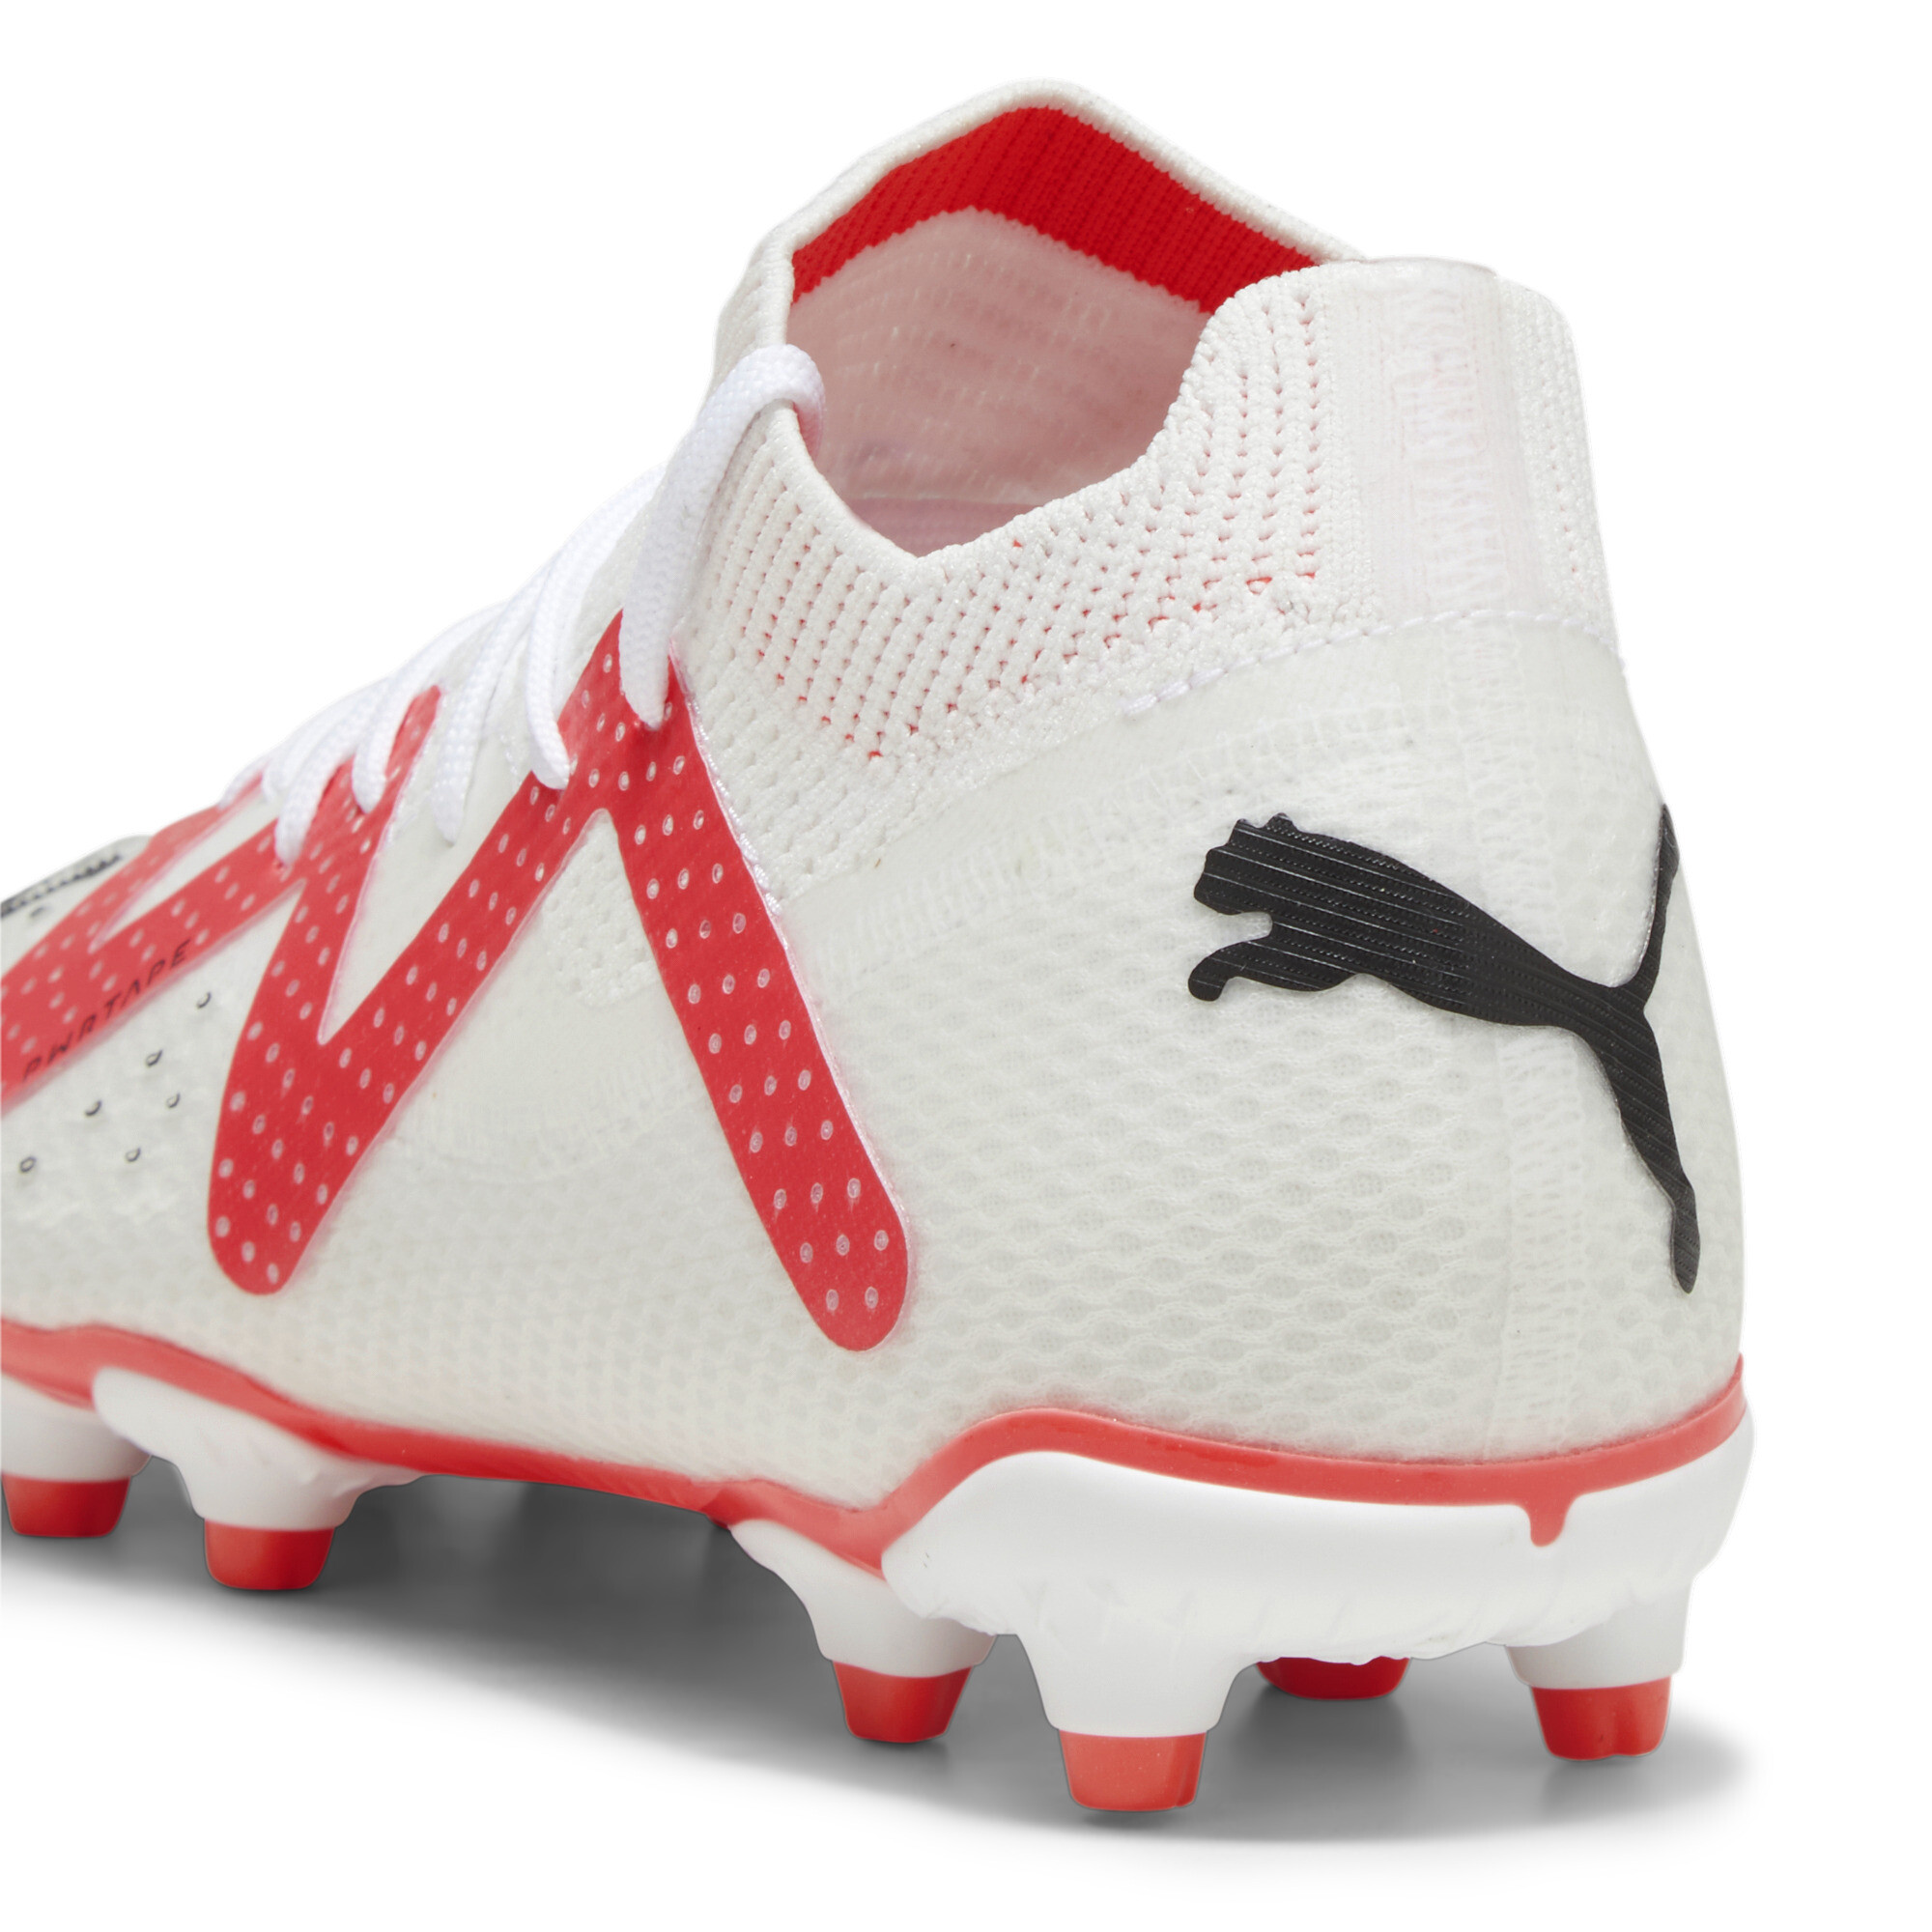 Puma FUTURE PRO FG/AG Youth Football Boots, White, Size 36, Shoes